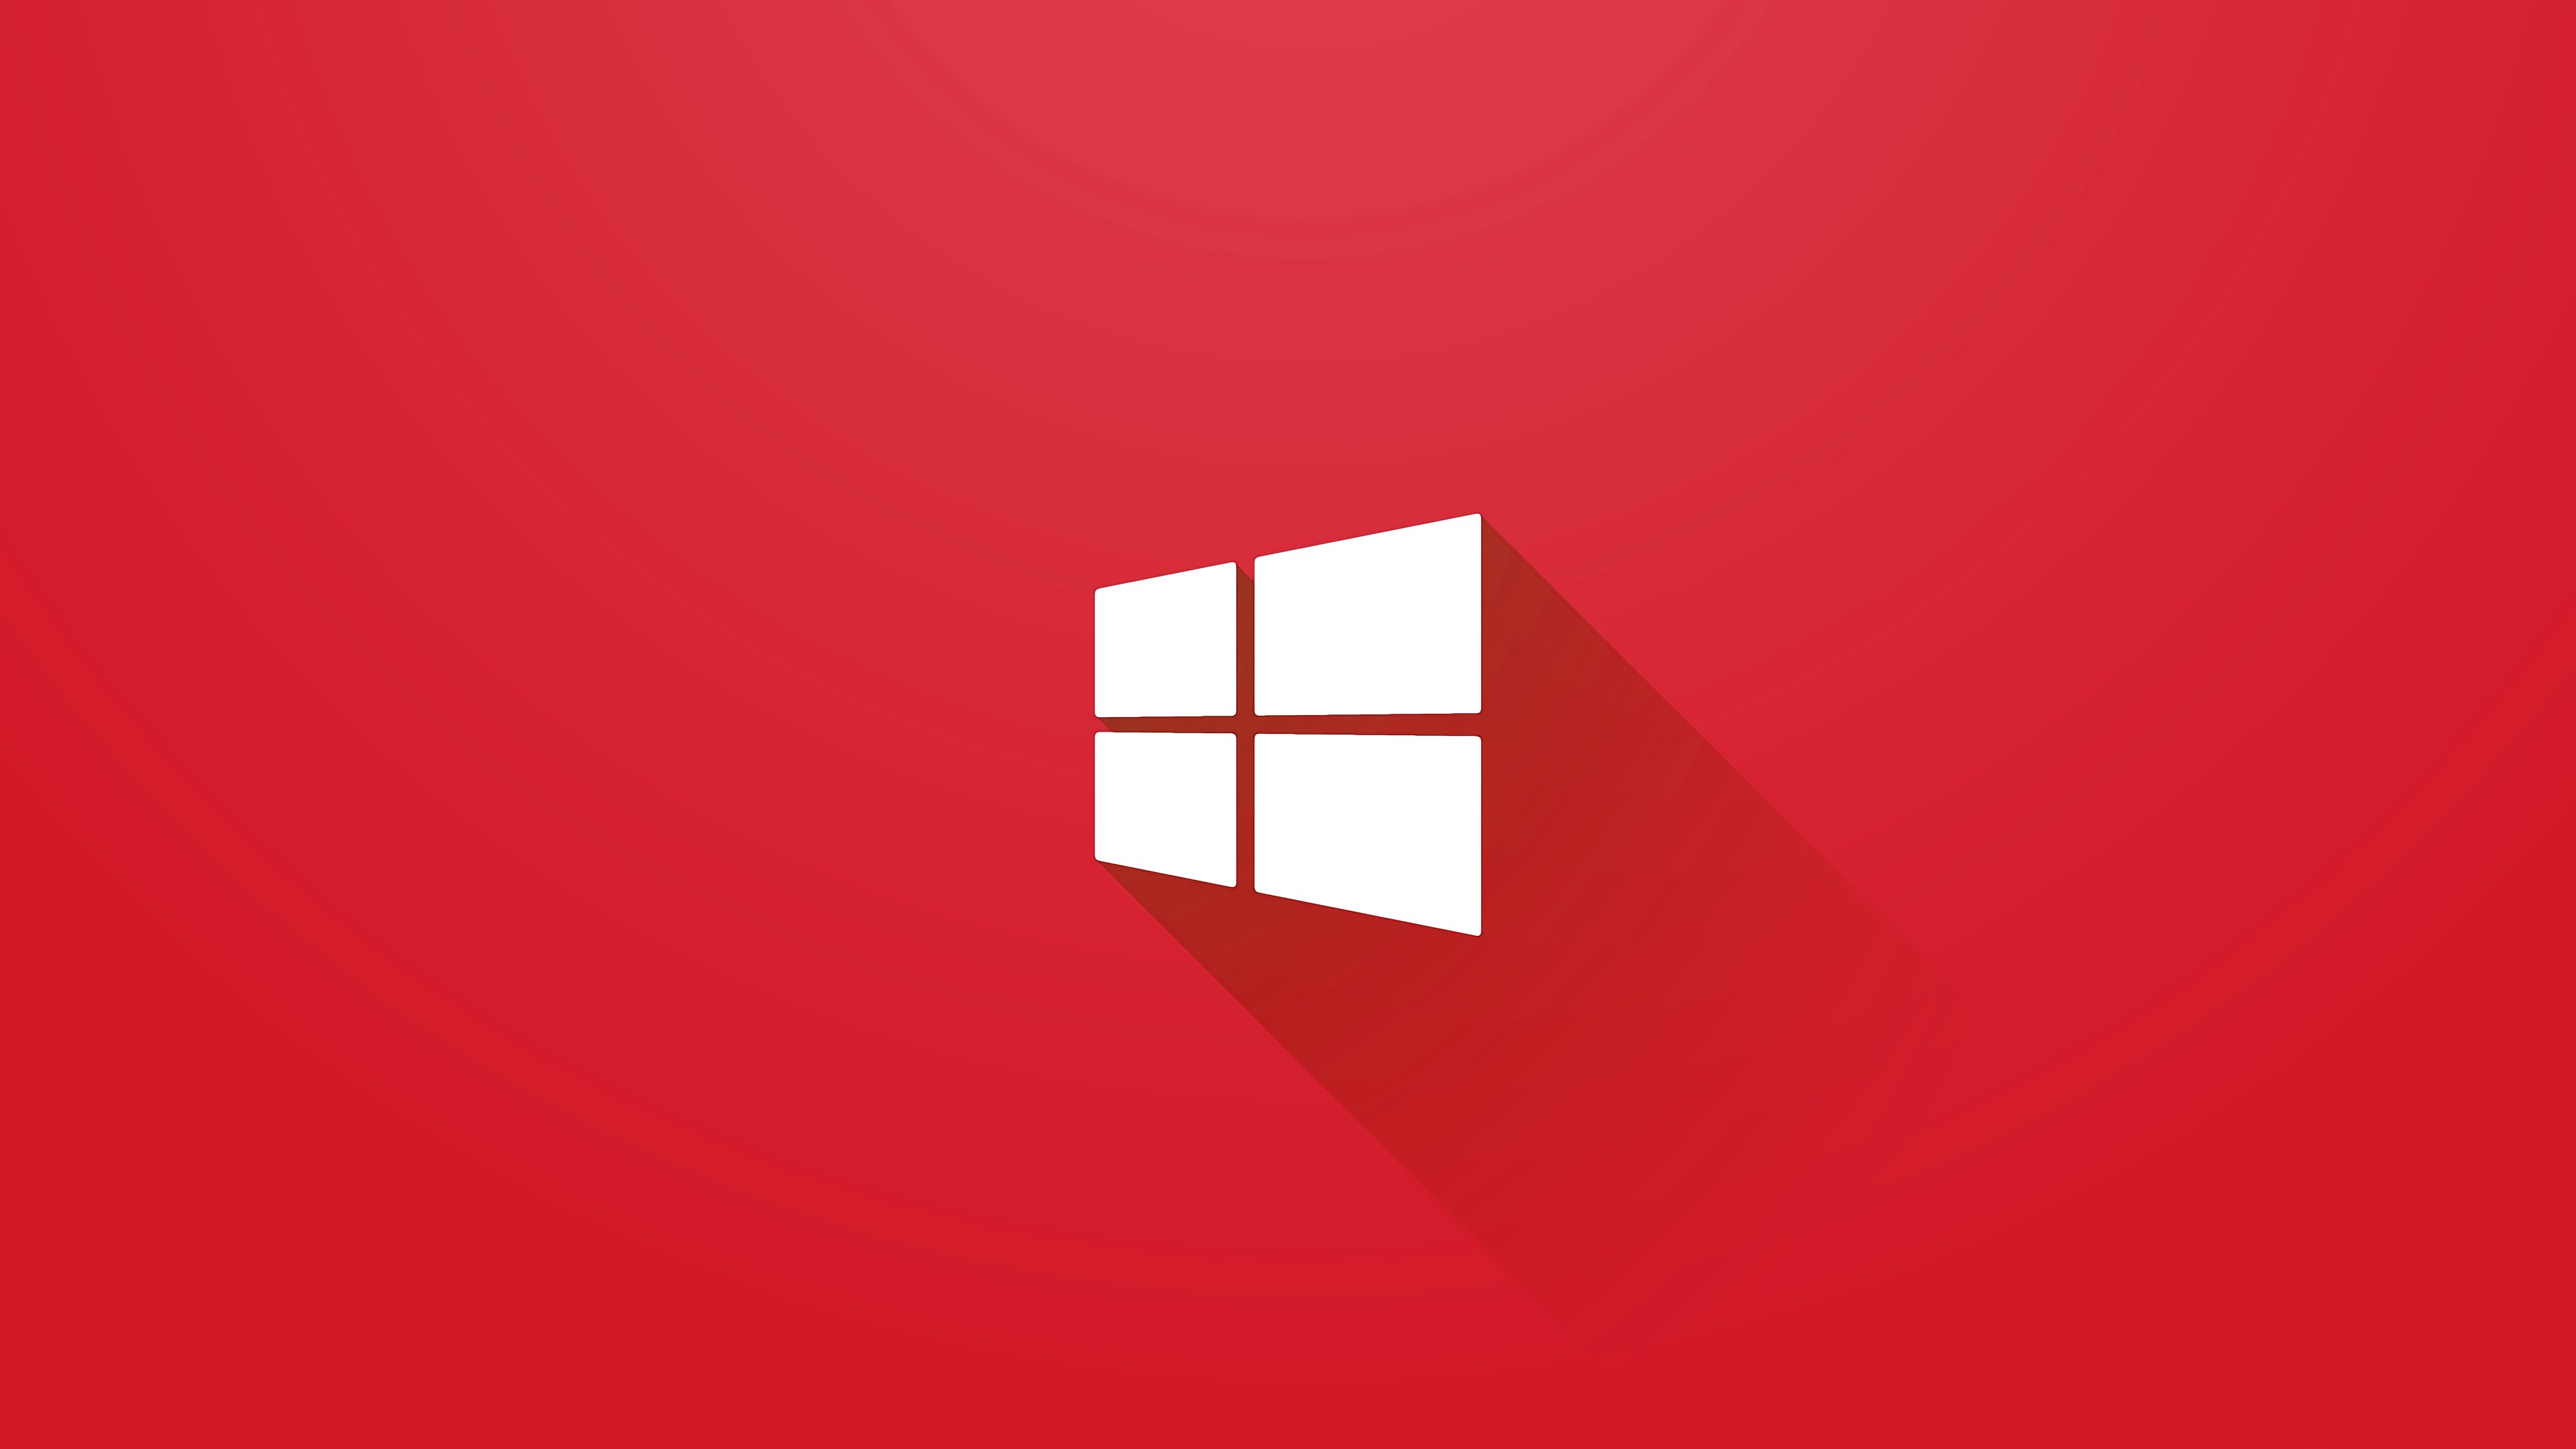 General 3840x2160 Windows 10 logo brand red operating system red background simple background Microsoft Windows